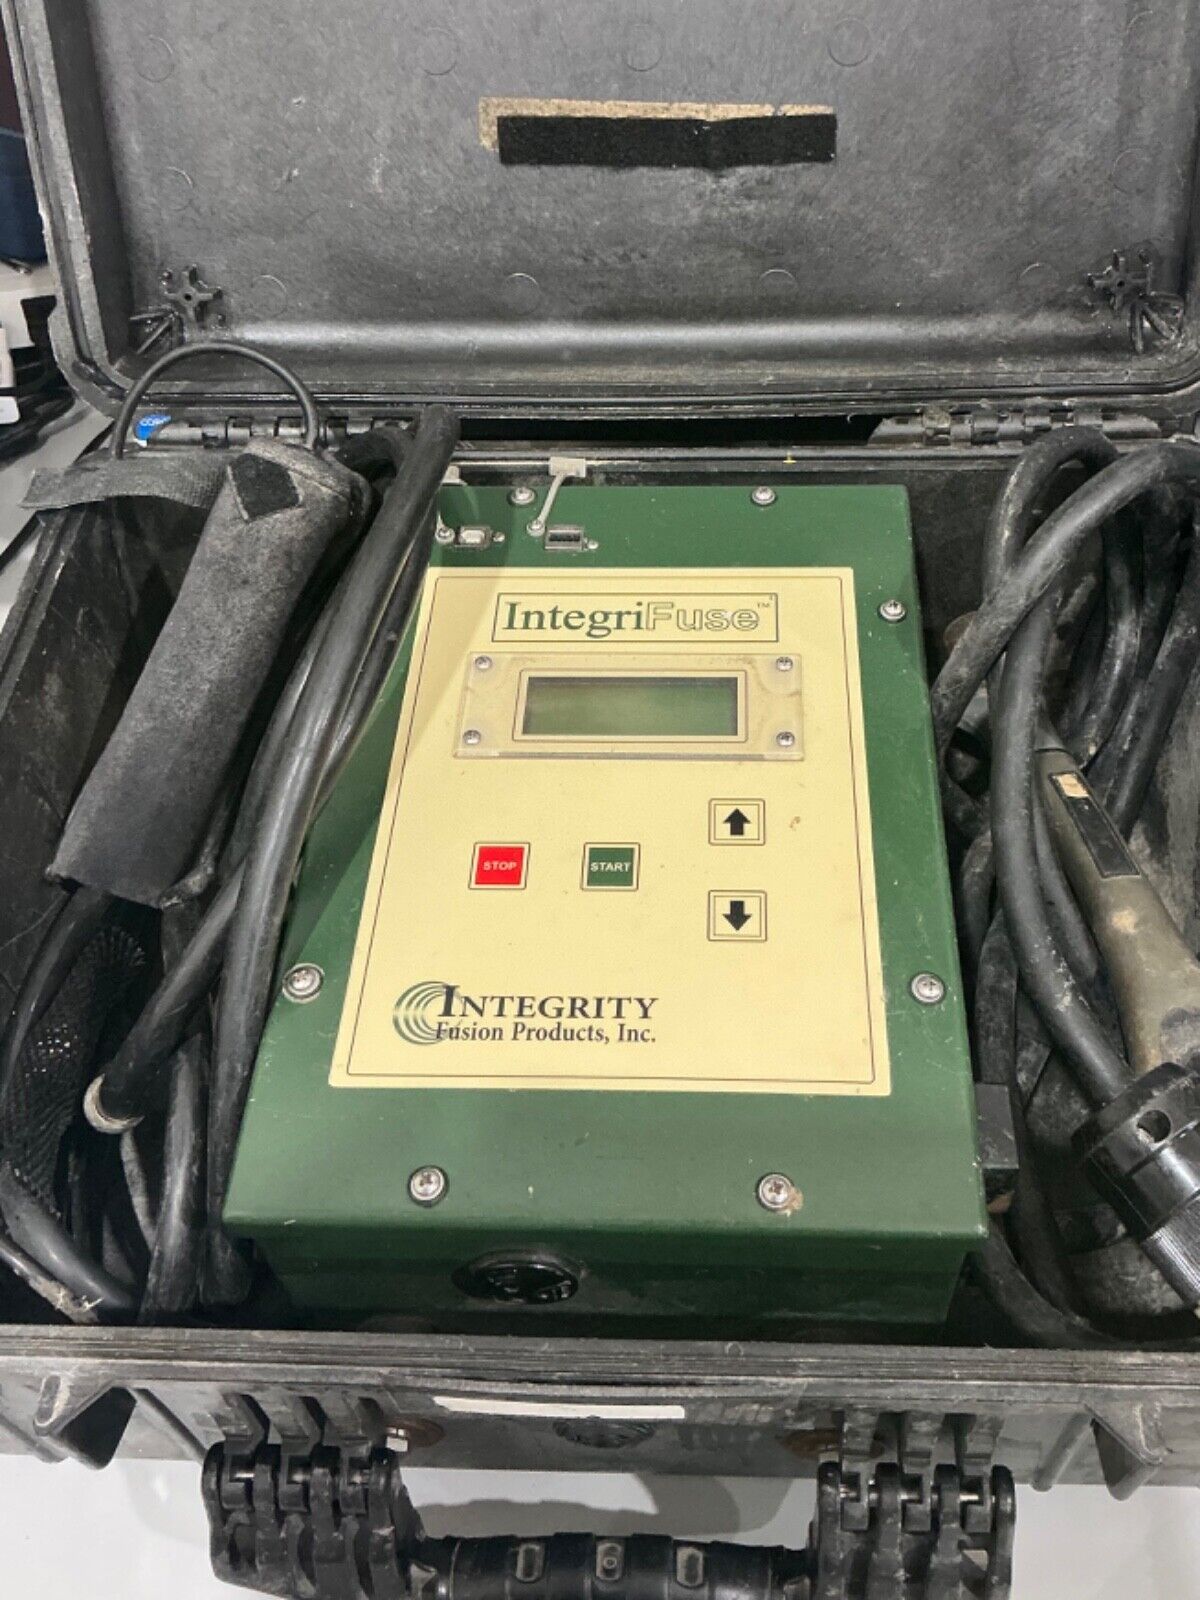 IntegriFuse Electrofusion Processor with Smartscan and GPS technologies